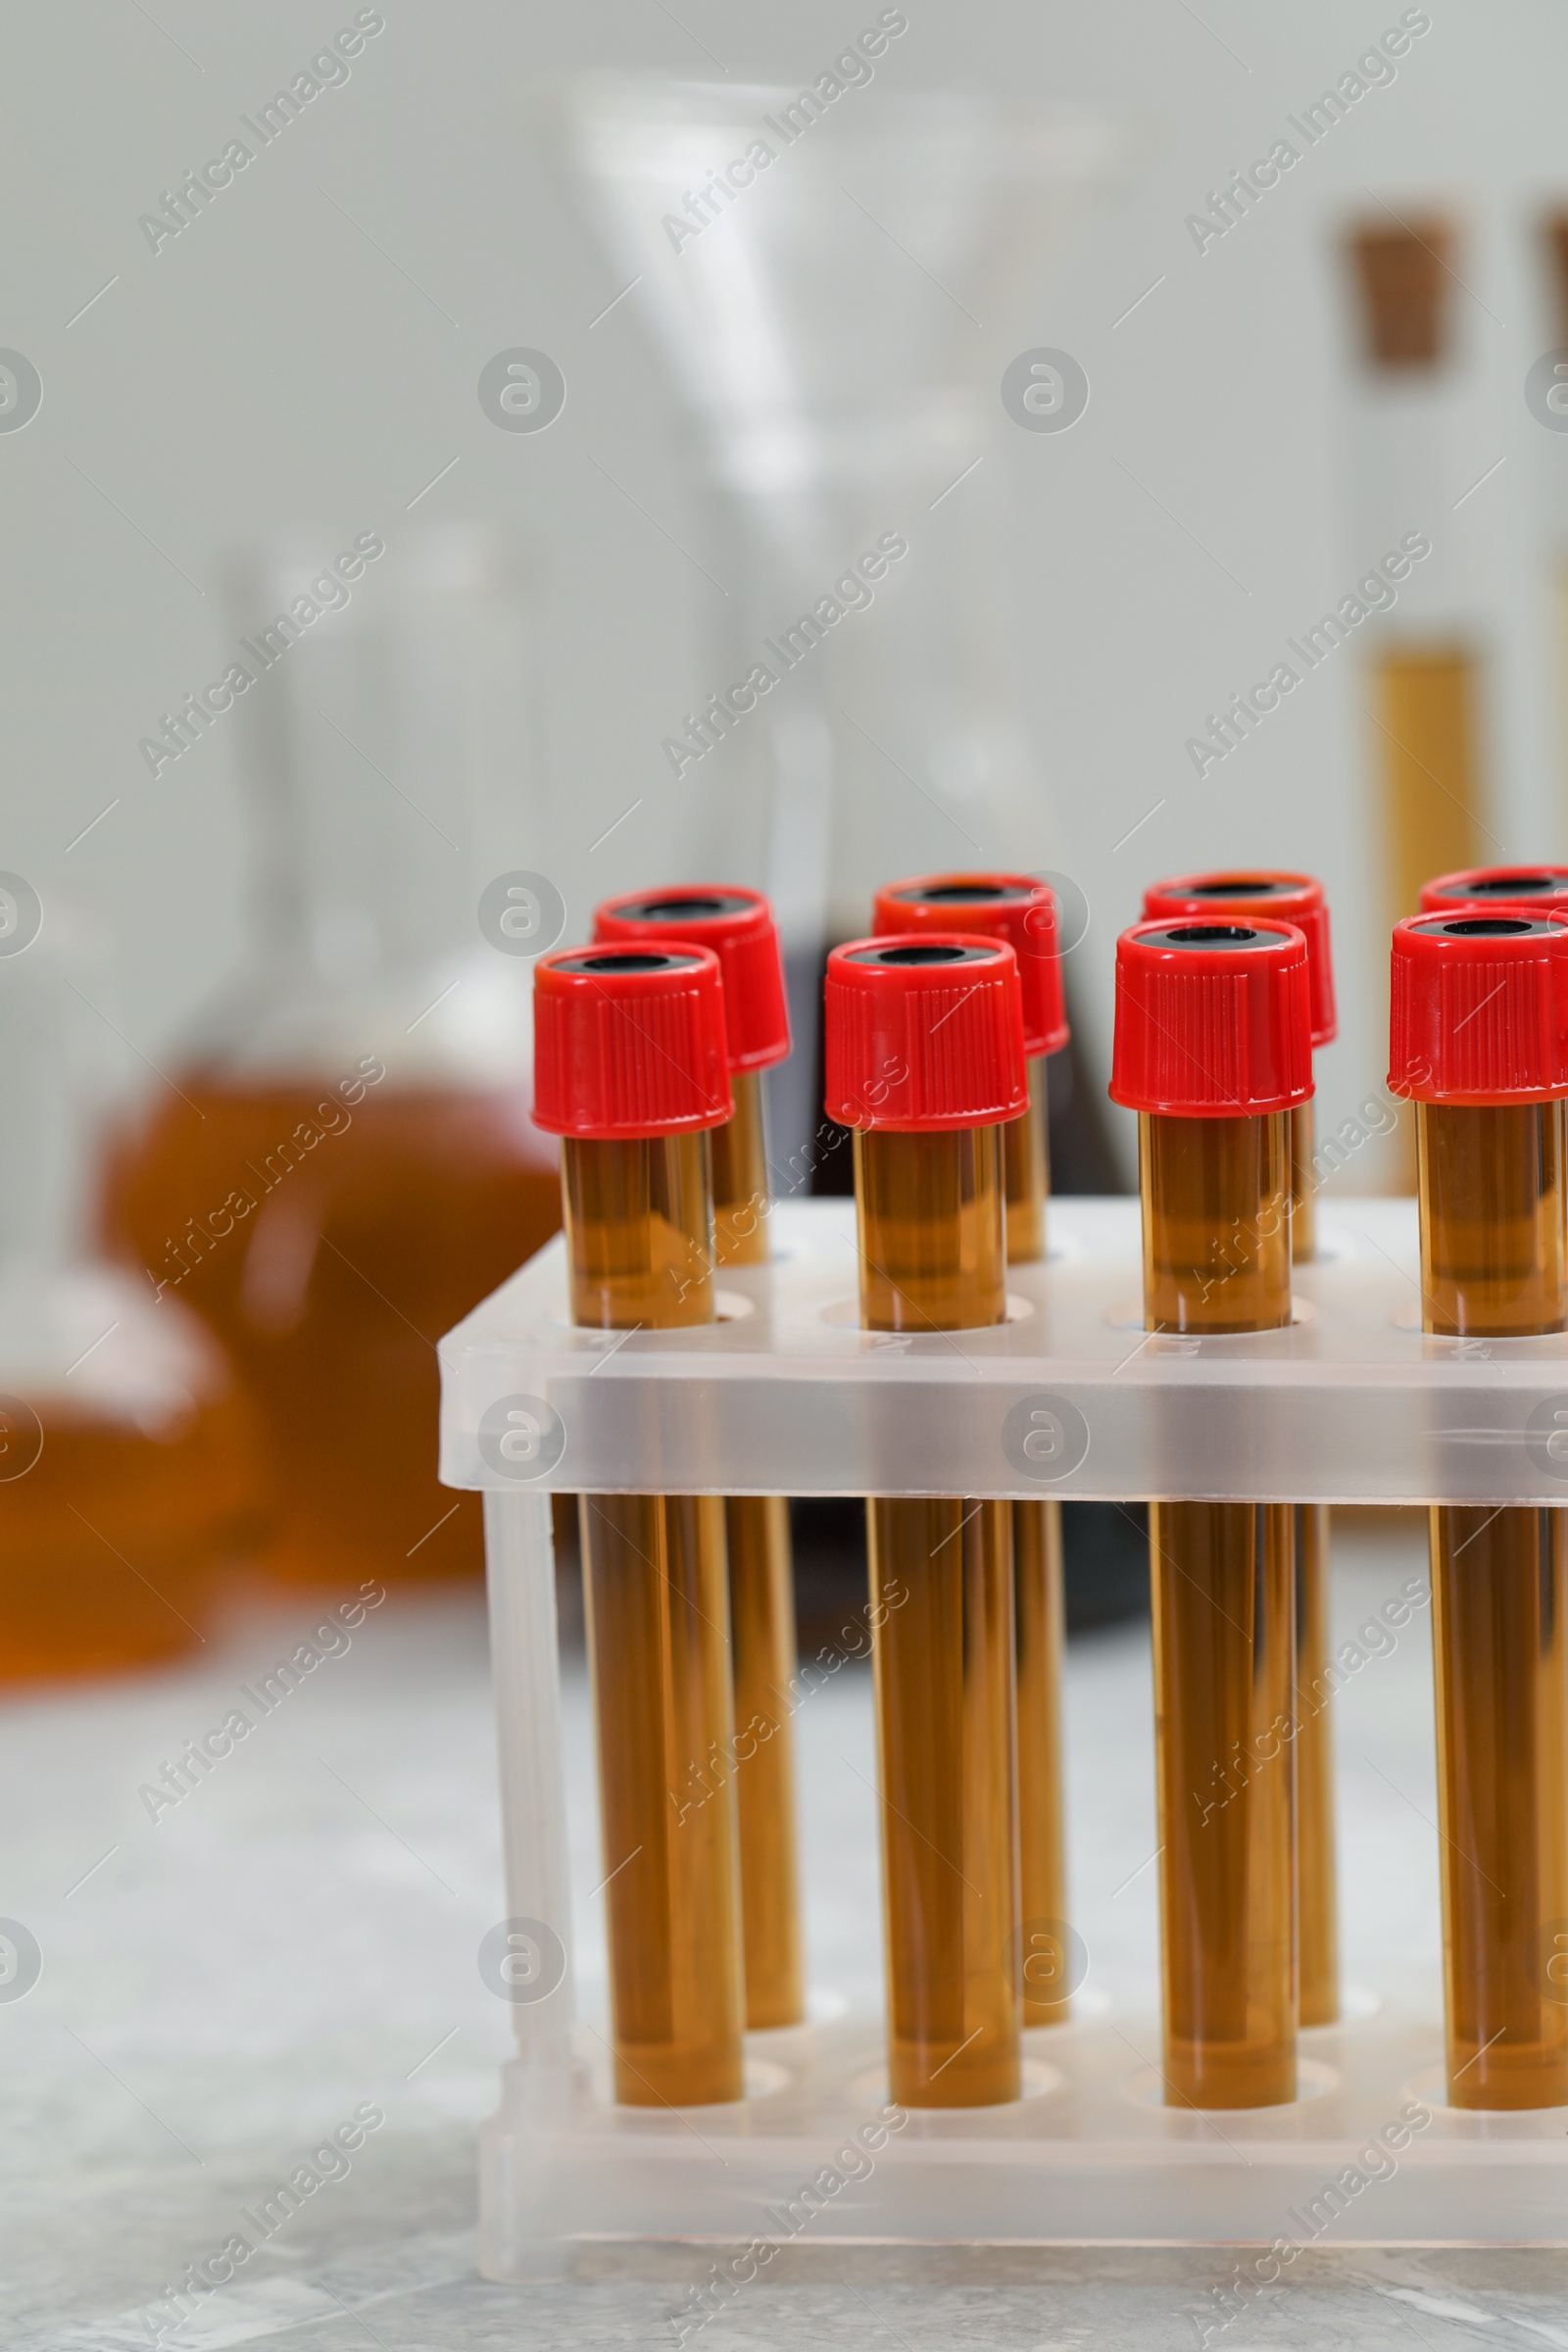 Photo of Test tubes with brown liquid in stand on table